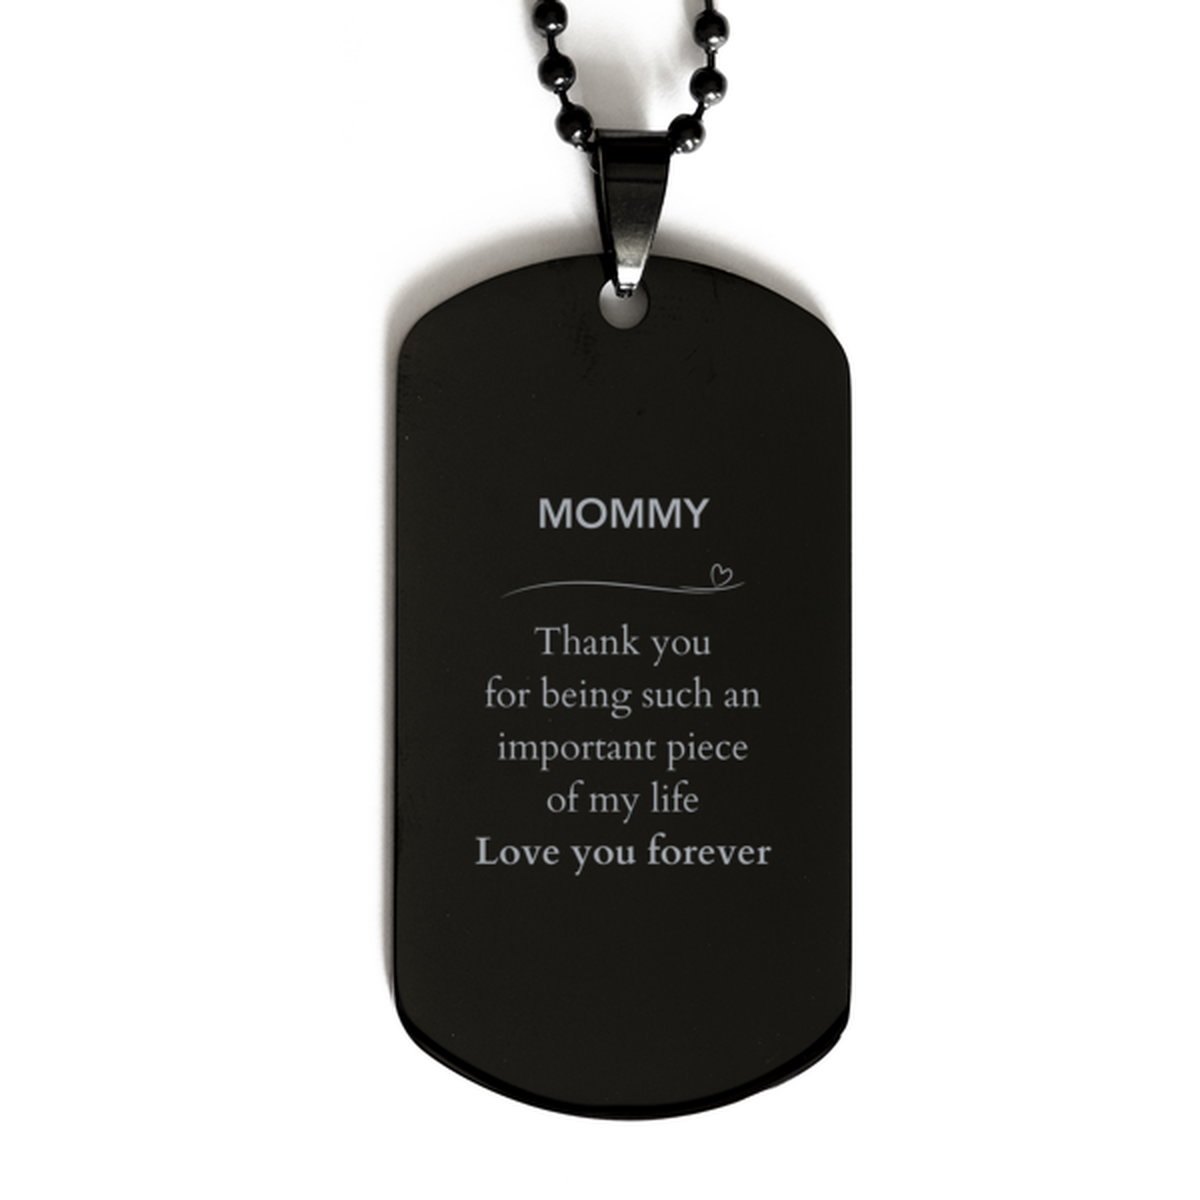 Appropriate Mommy Black Dog Tag Epic Birthday Gifts for Mommy Thank you for being such an important piece of my life Mommy Christmas Mothers Fathers Day